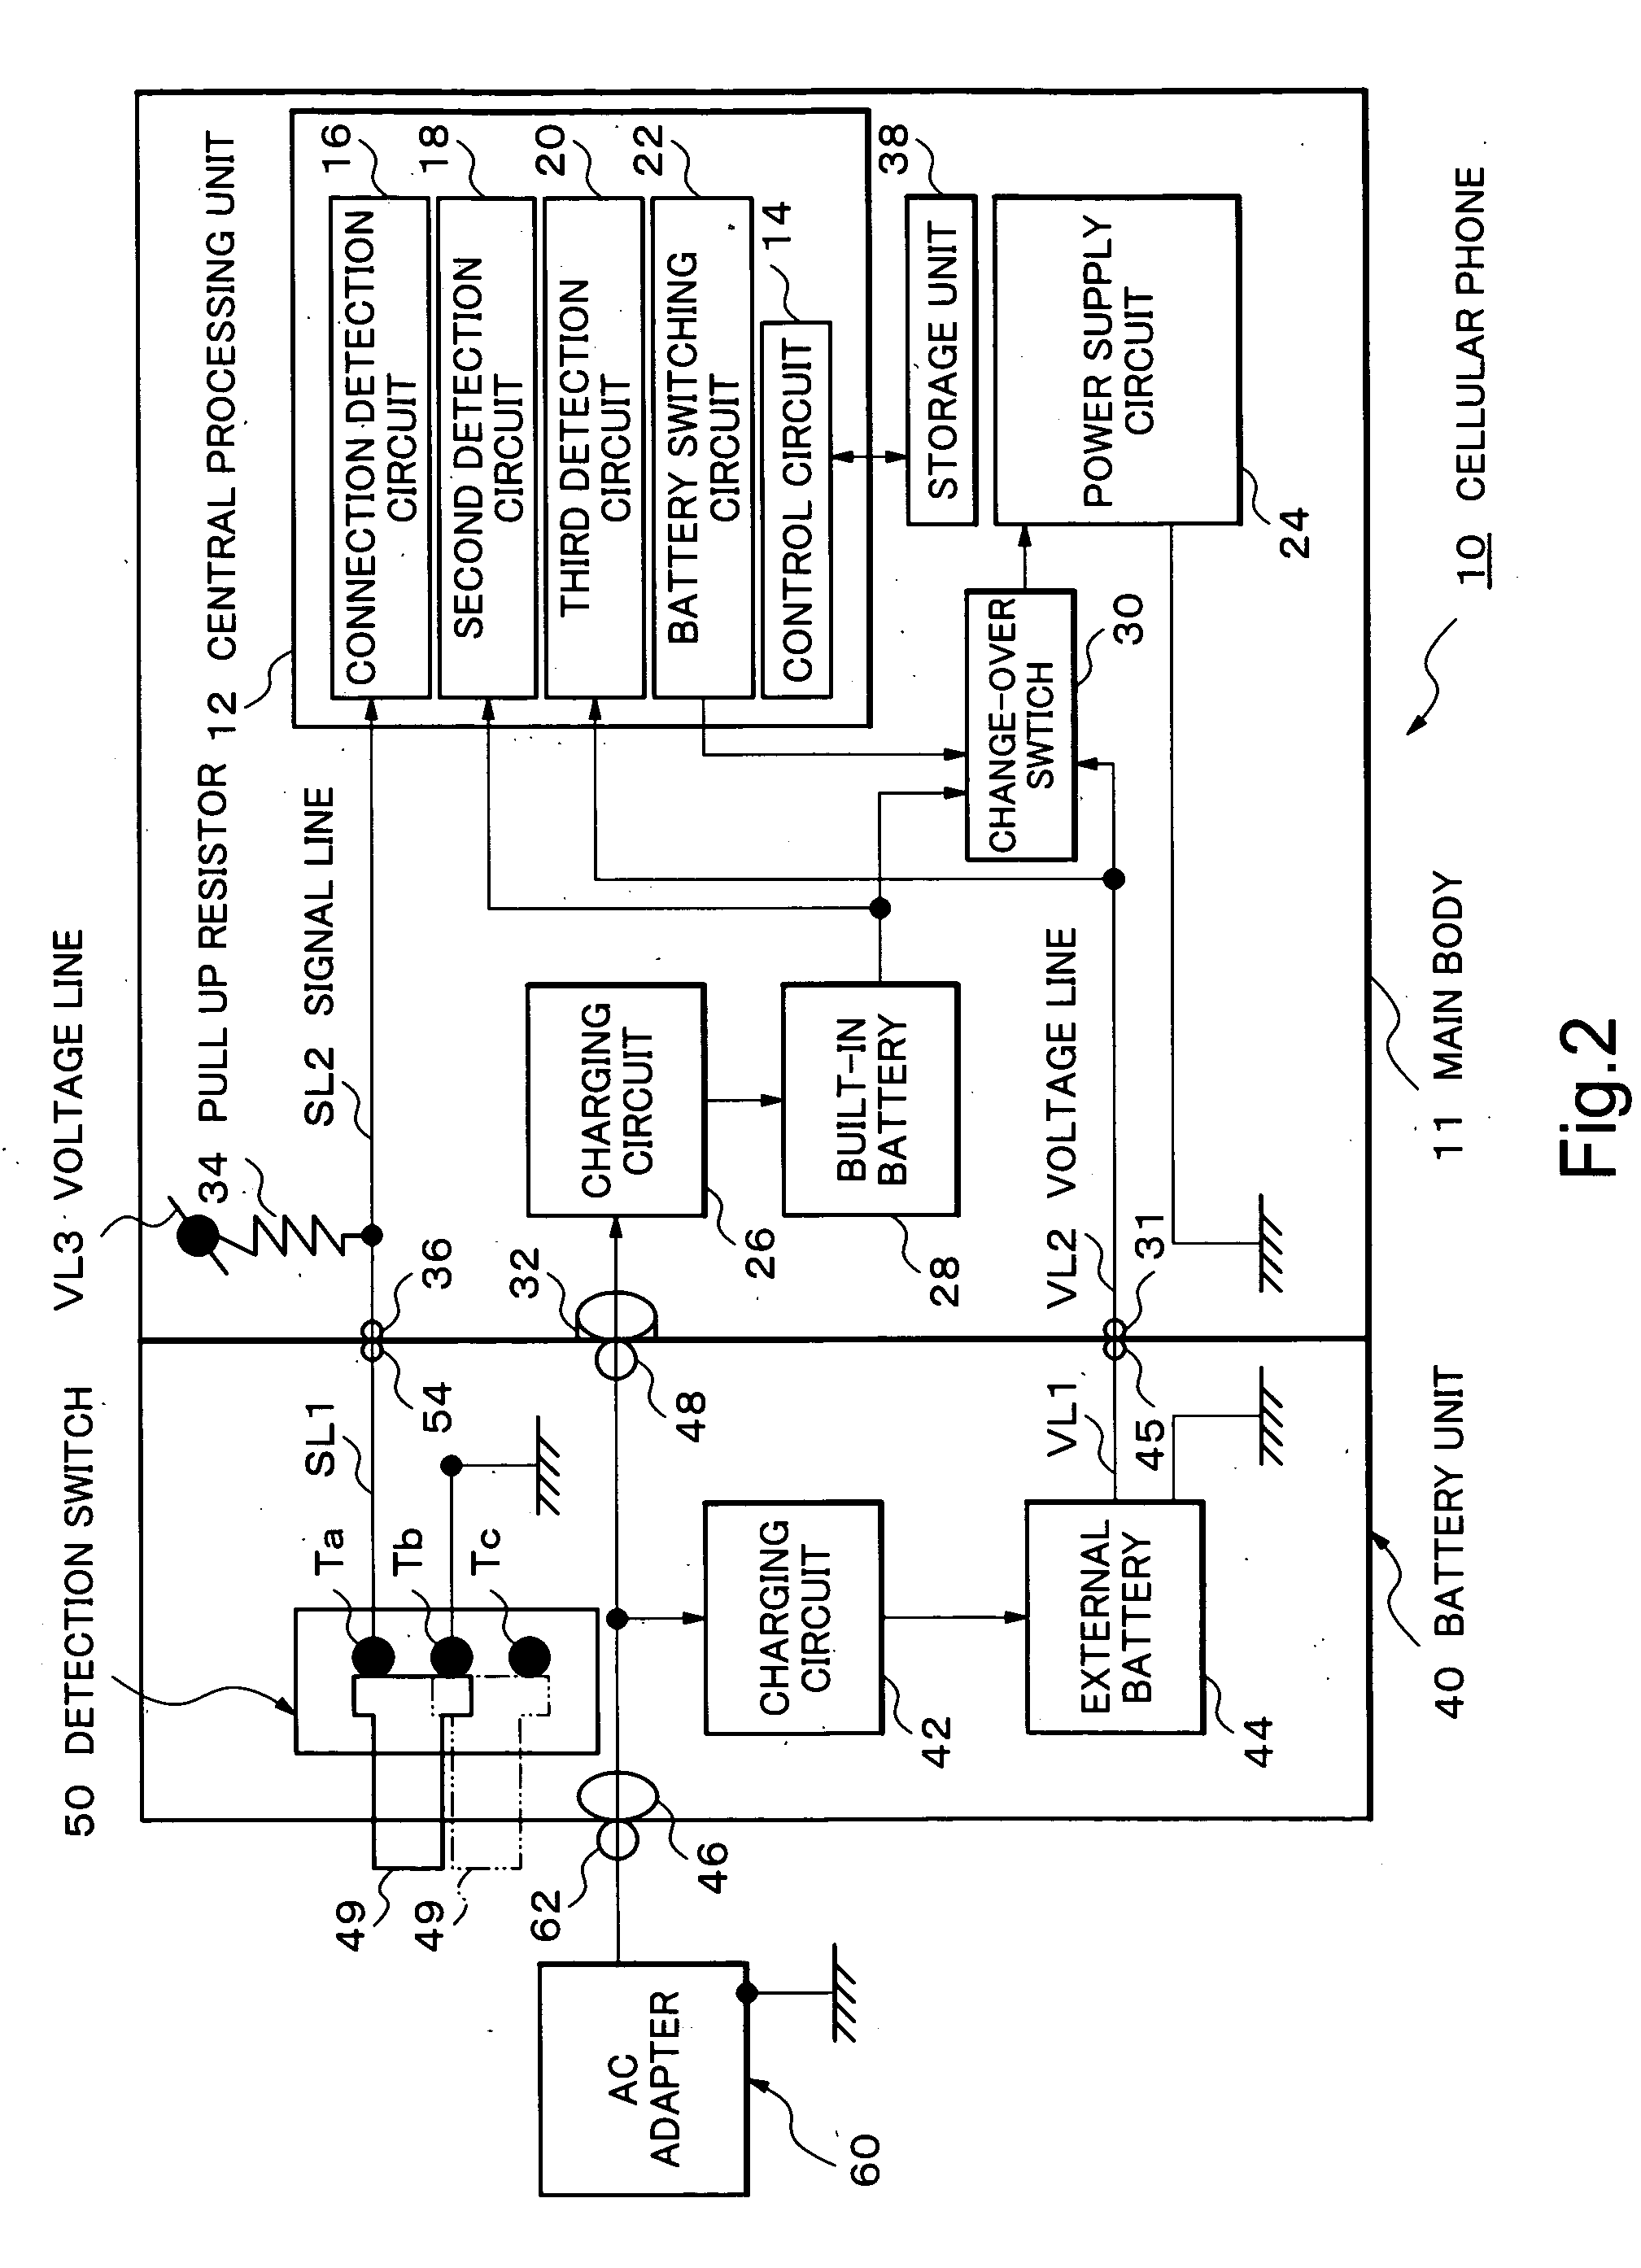 Power apparatus and electronic equipment